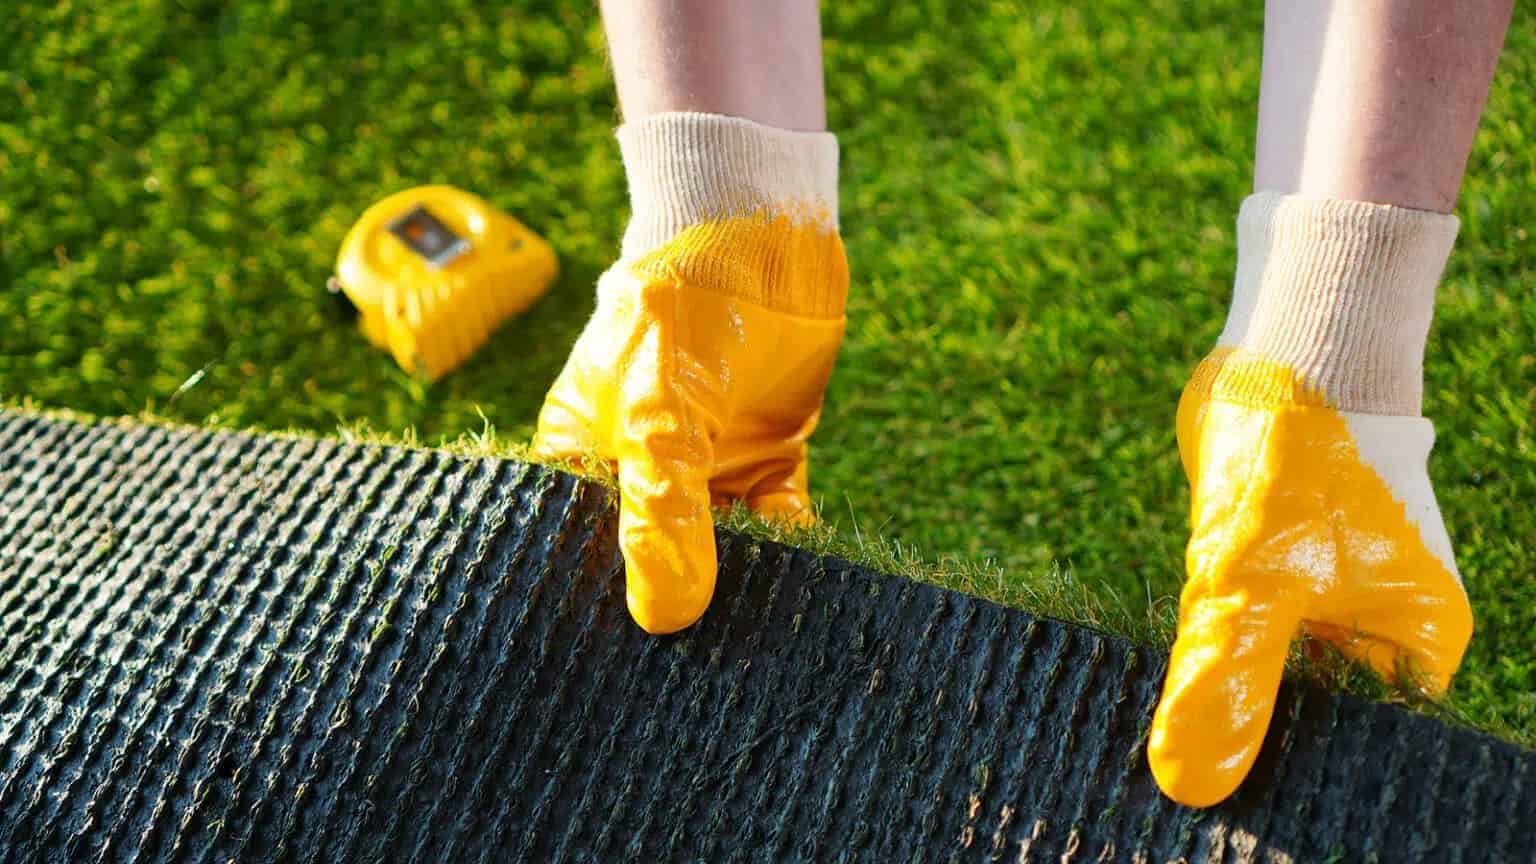 Installer showing rubber backing of artificial turf